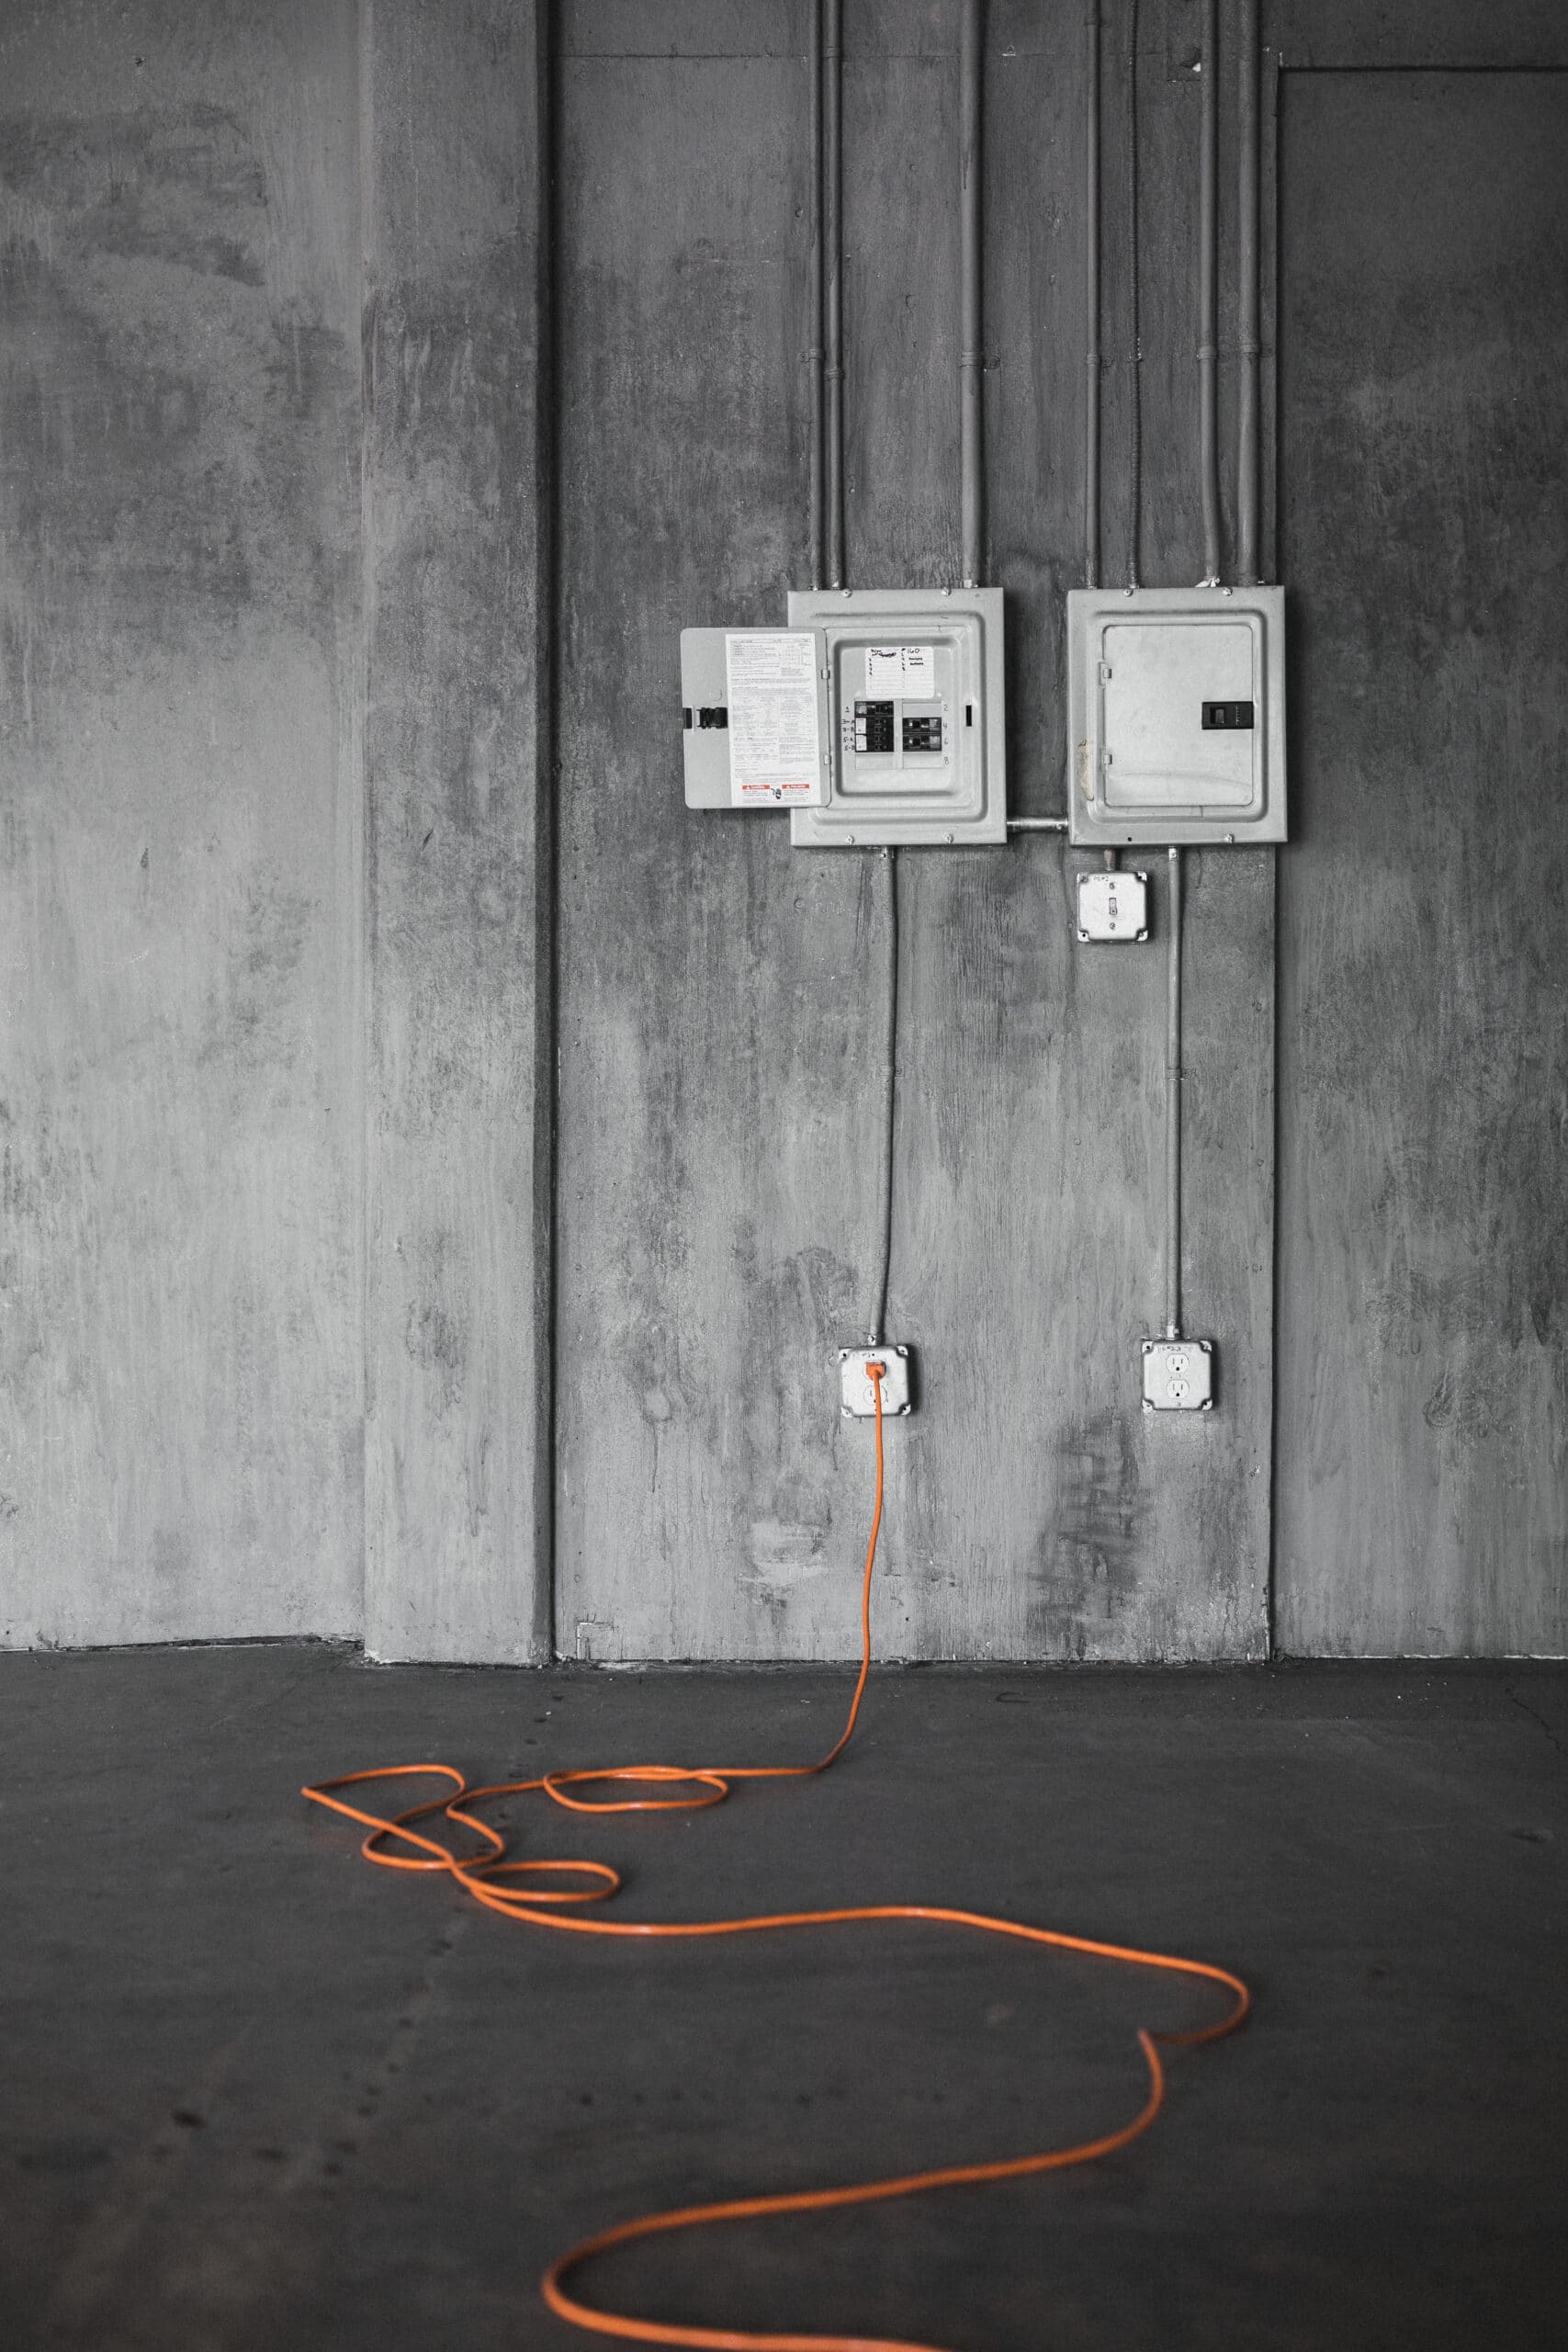 Electrical equipment in a room with an orange cable.